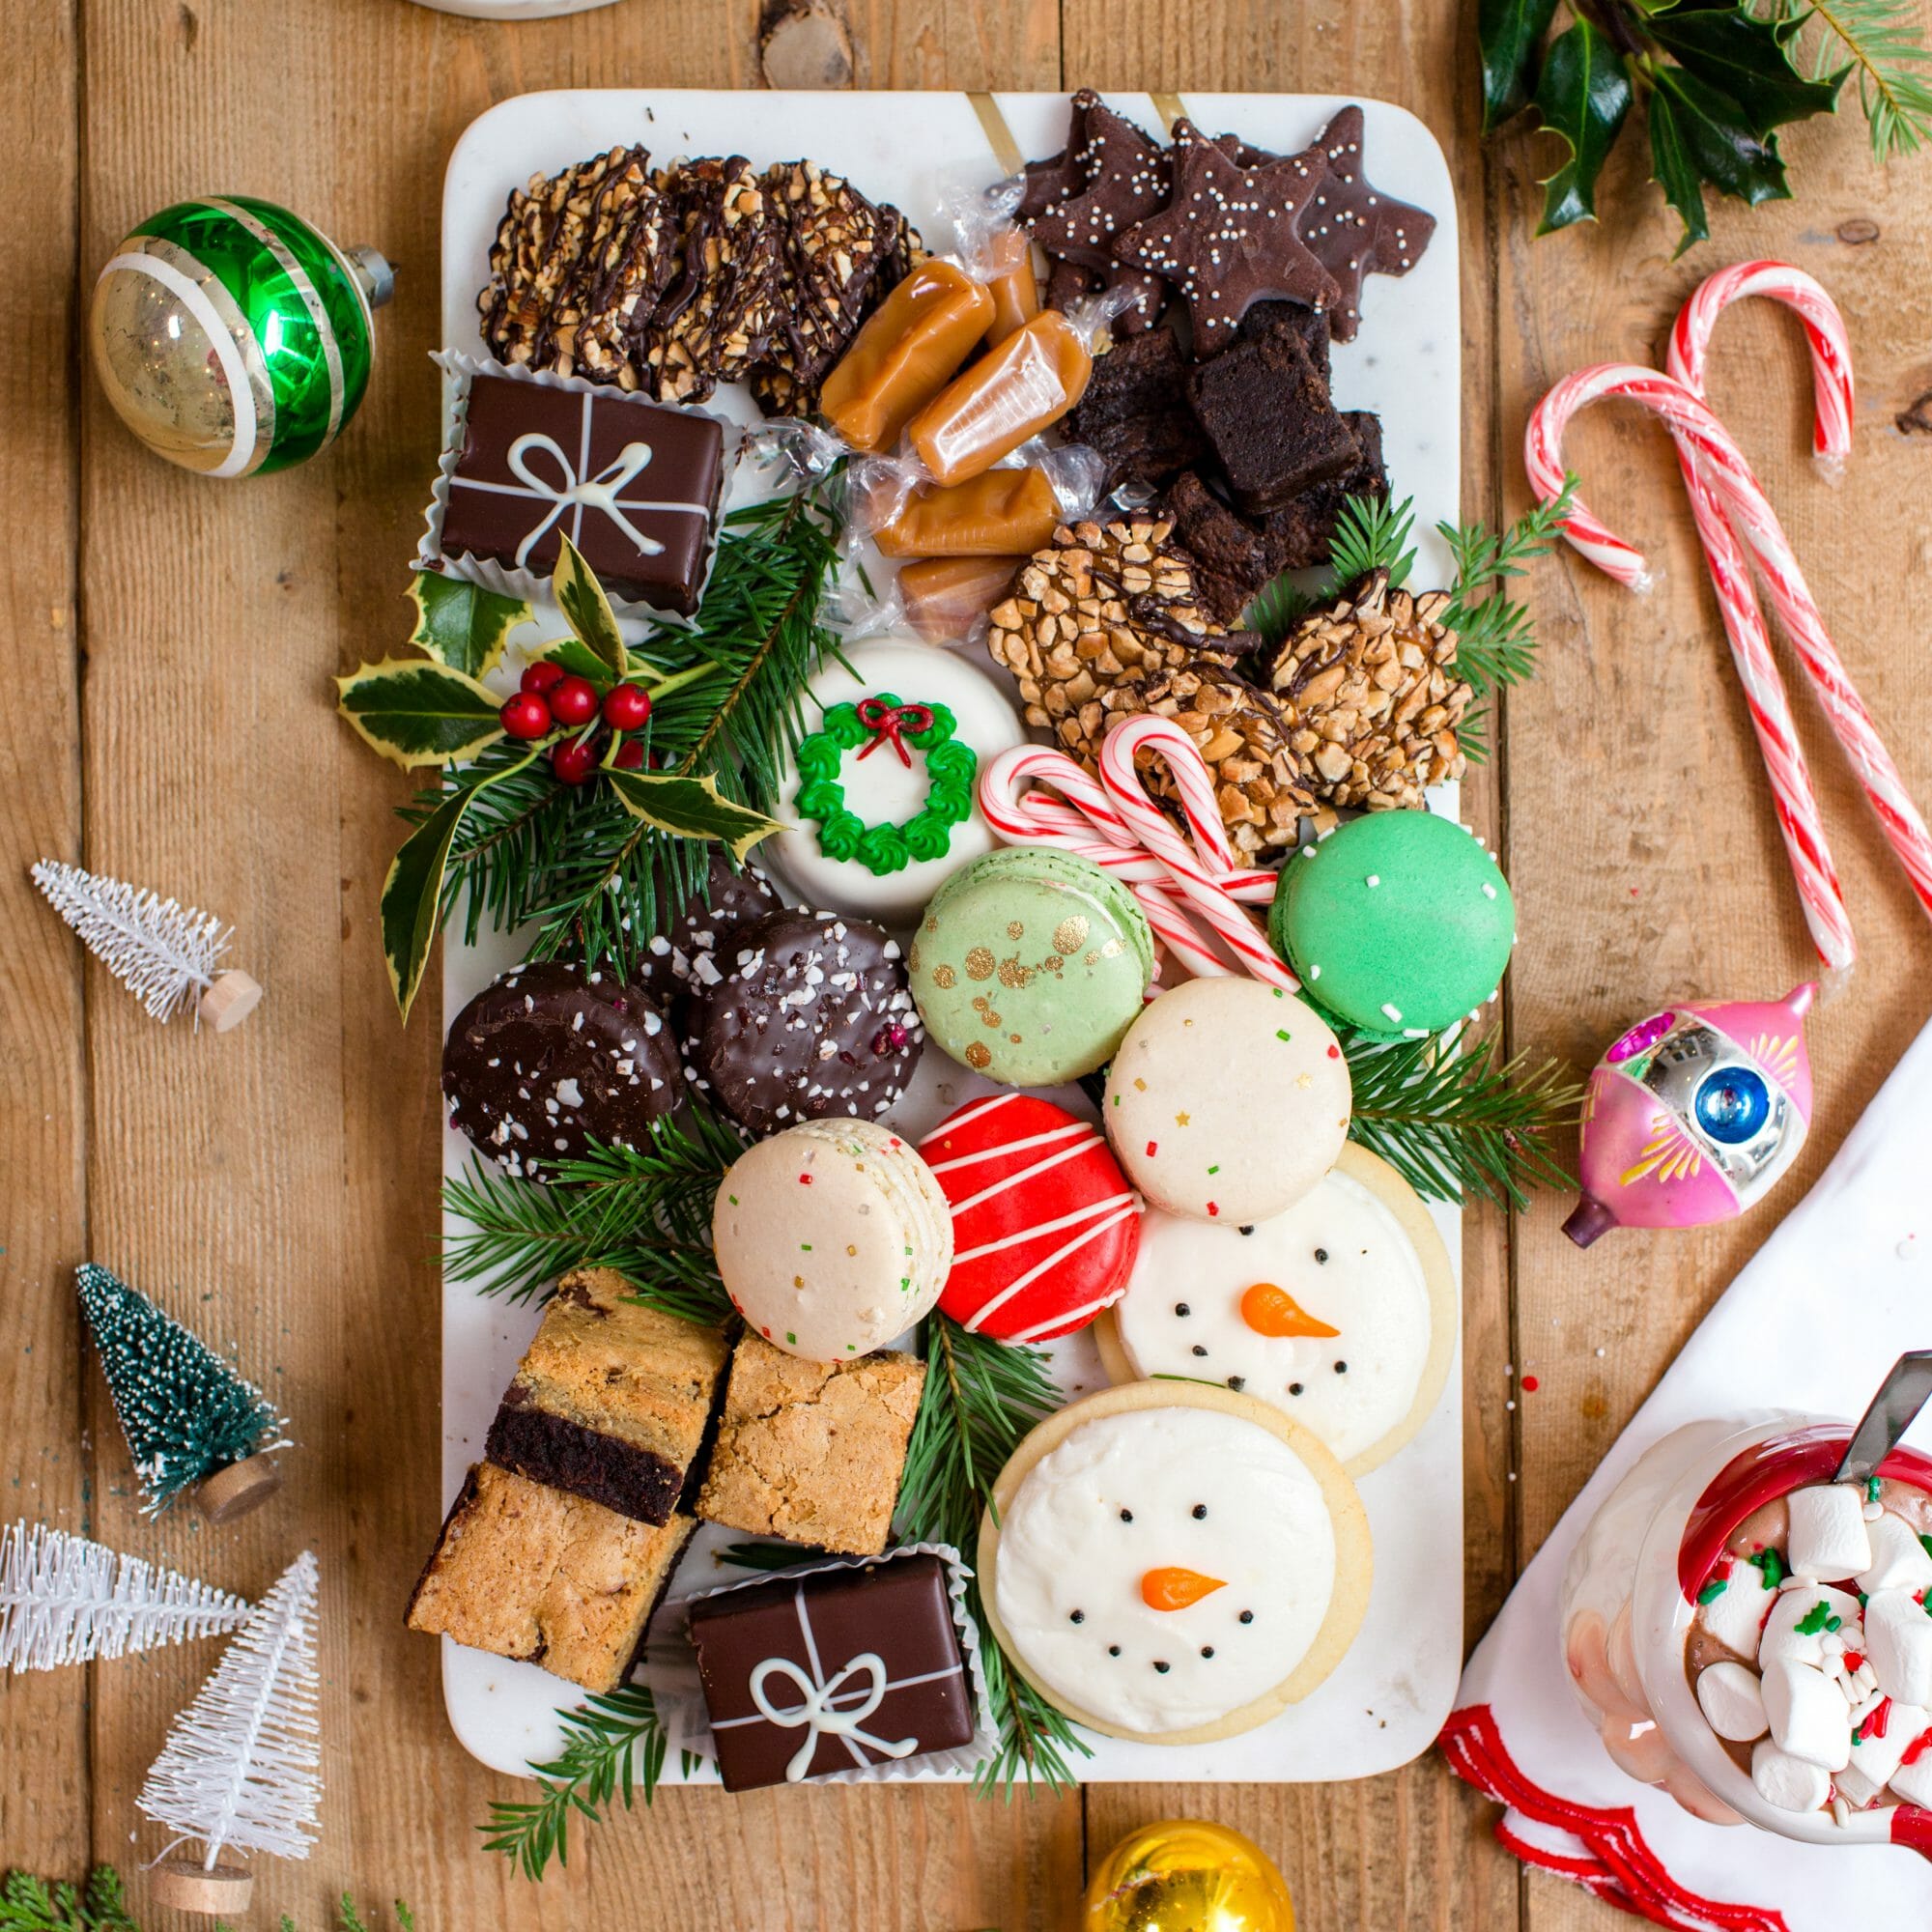 Cookie Squad Favorite Things Party | holiday party ideas | how to host a favorite things party || JennyCookies.com #holidayparty #favoritethings #partyideas #jennycookies